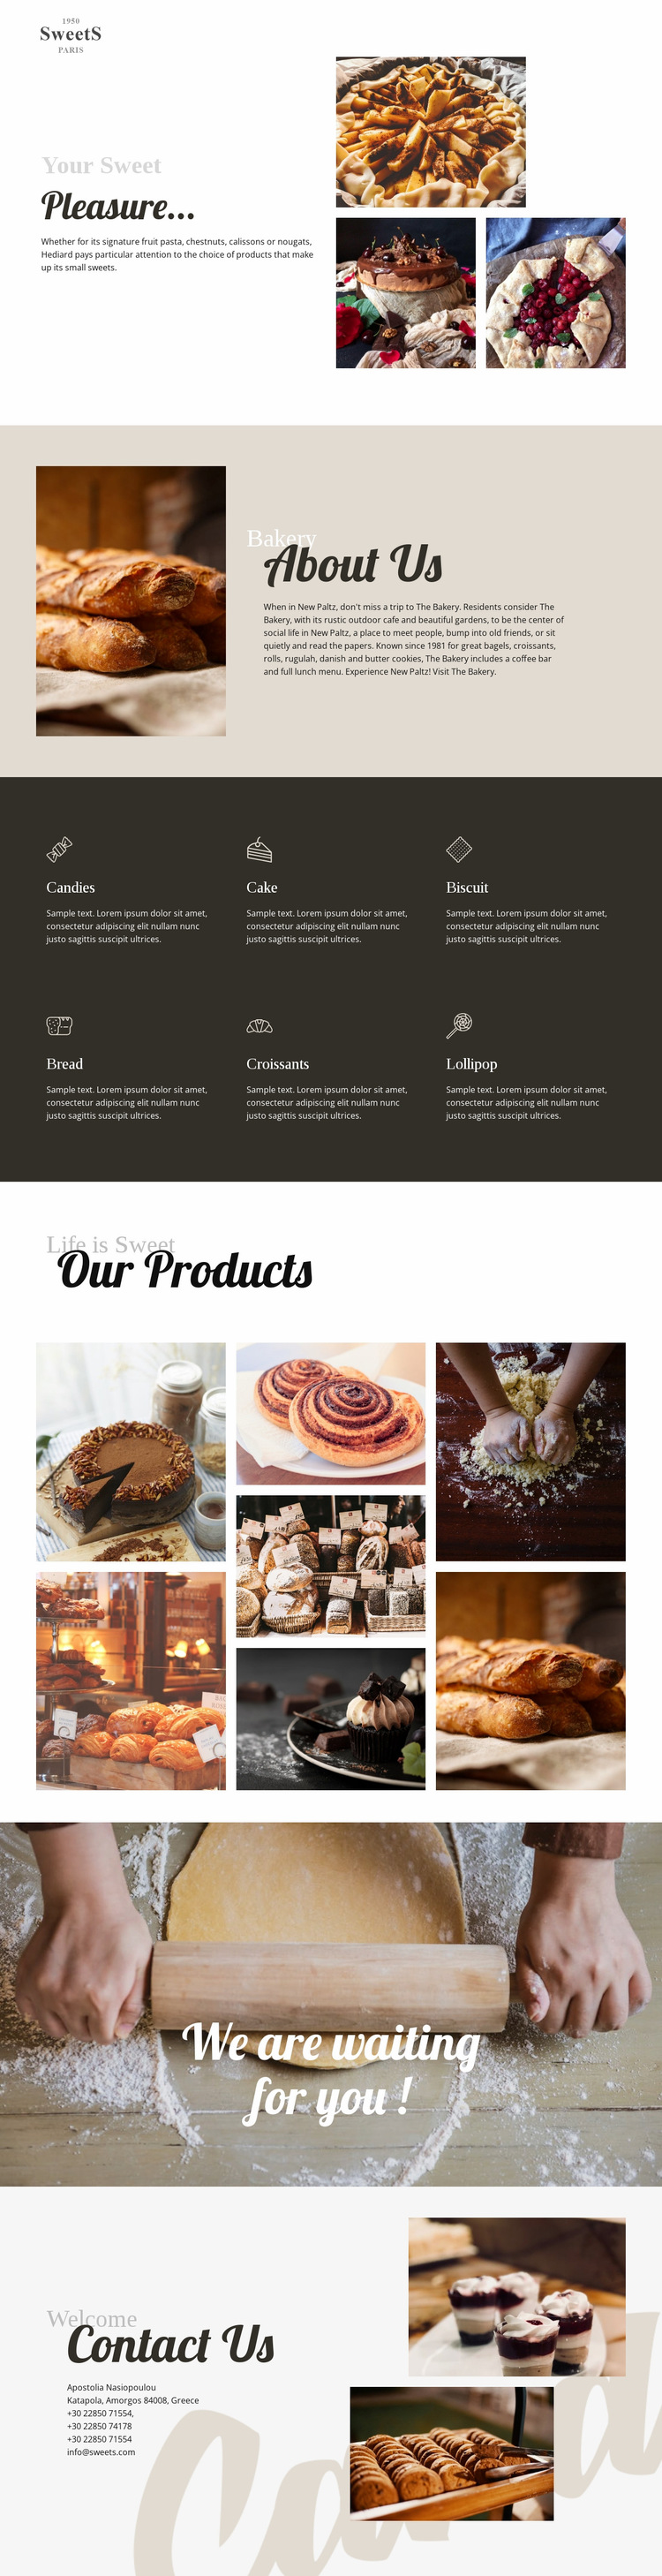 Cakes and baking food Website Builder Templates